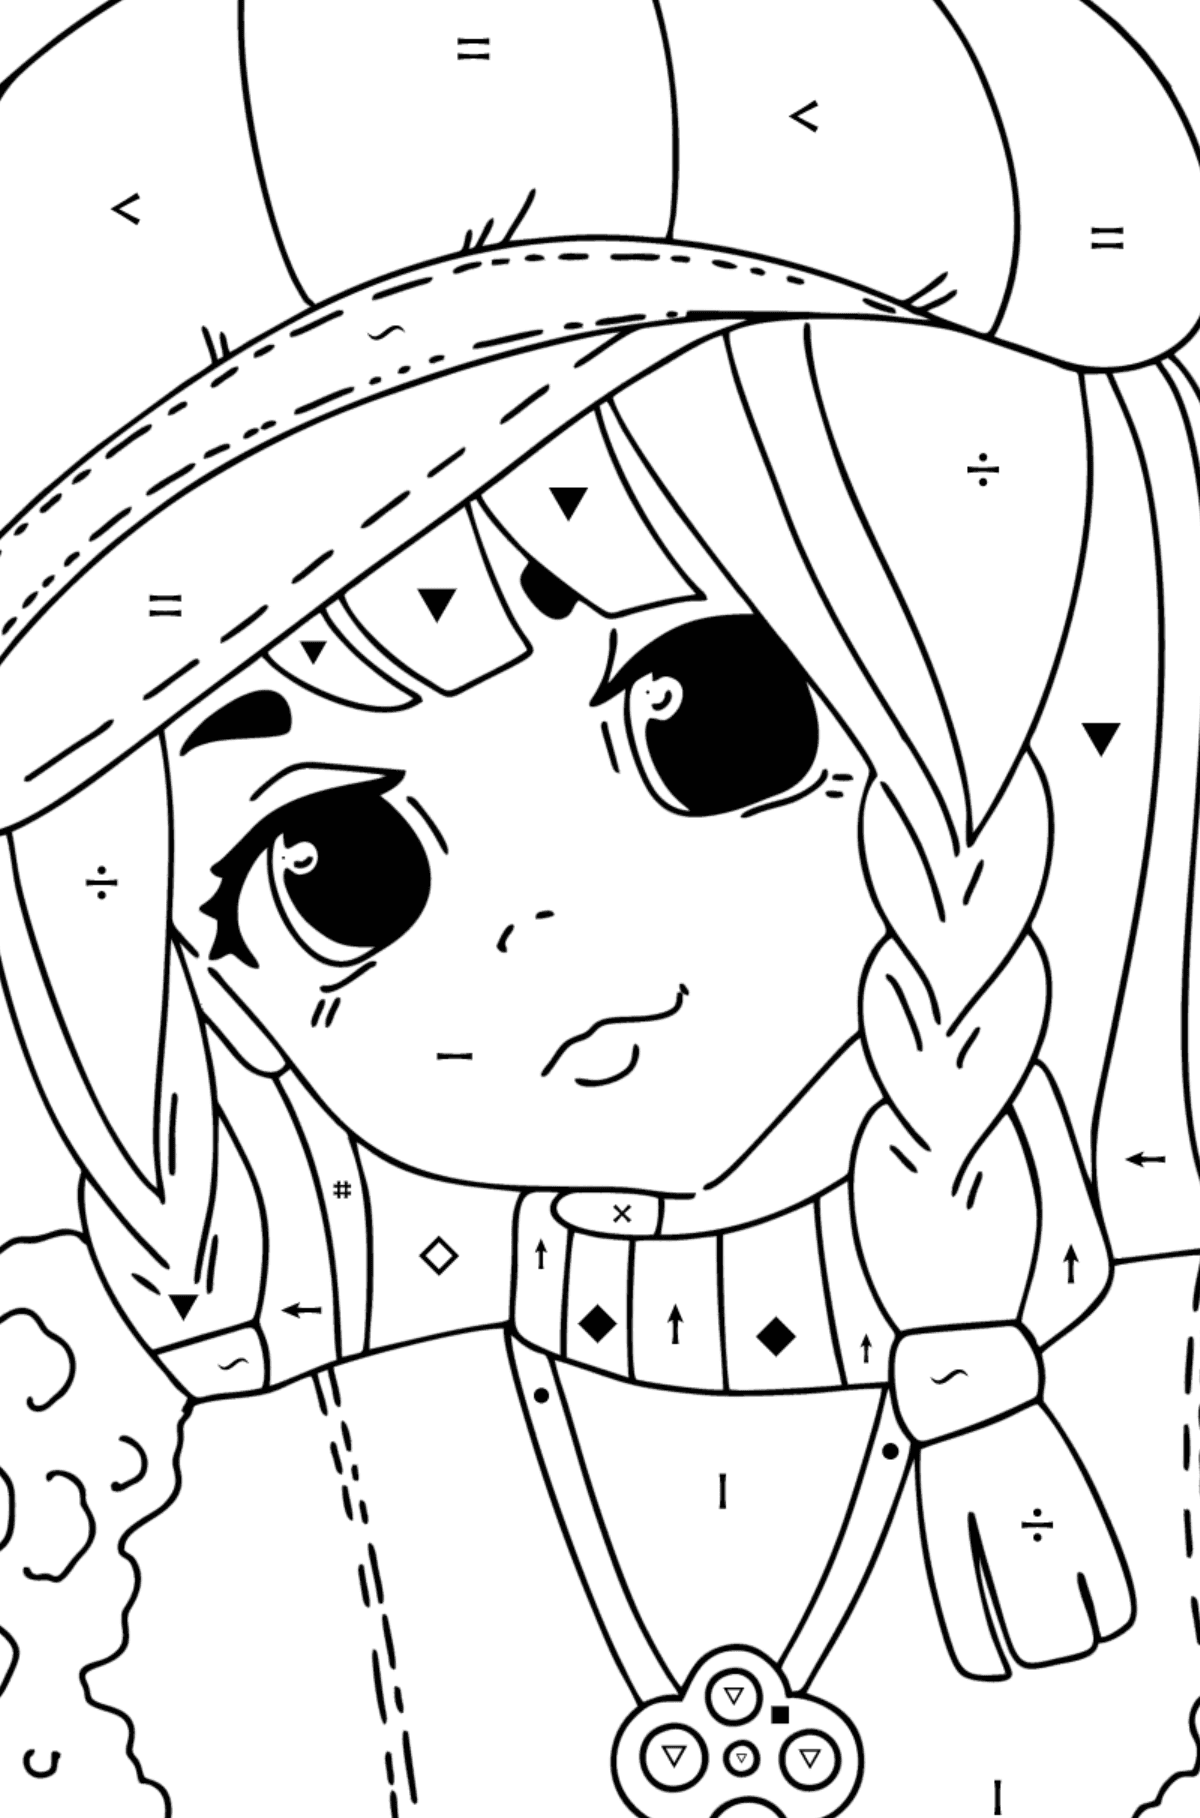 Portrait of a teen girl coloring page - Coloring by Symbols for Kids